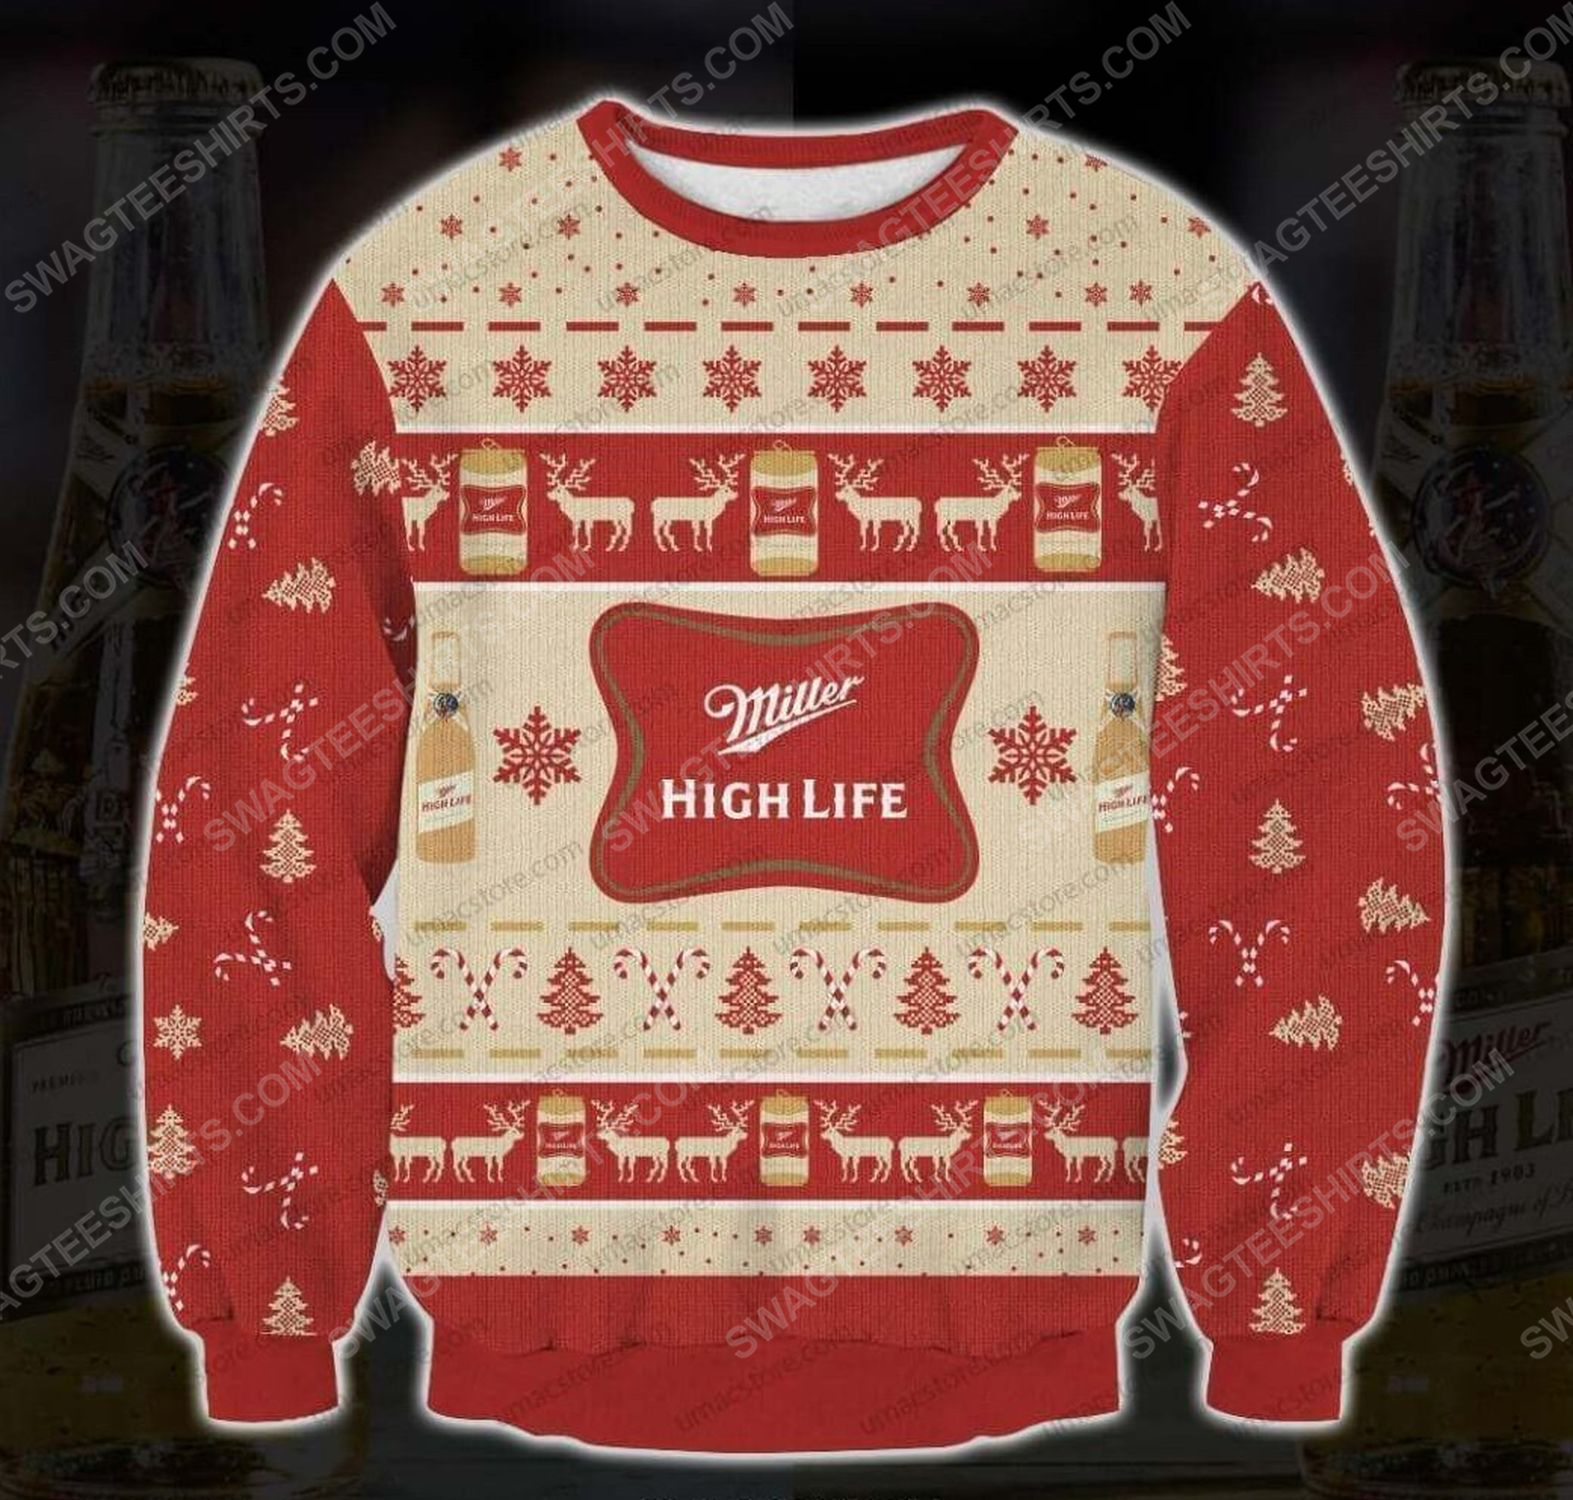 Miller high life beer ugly christmas sweater - Copy (2)